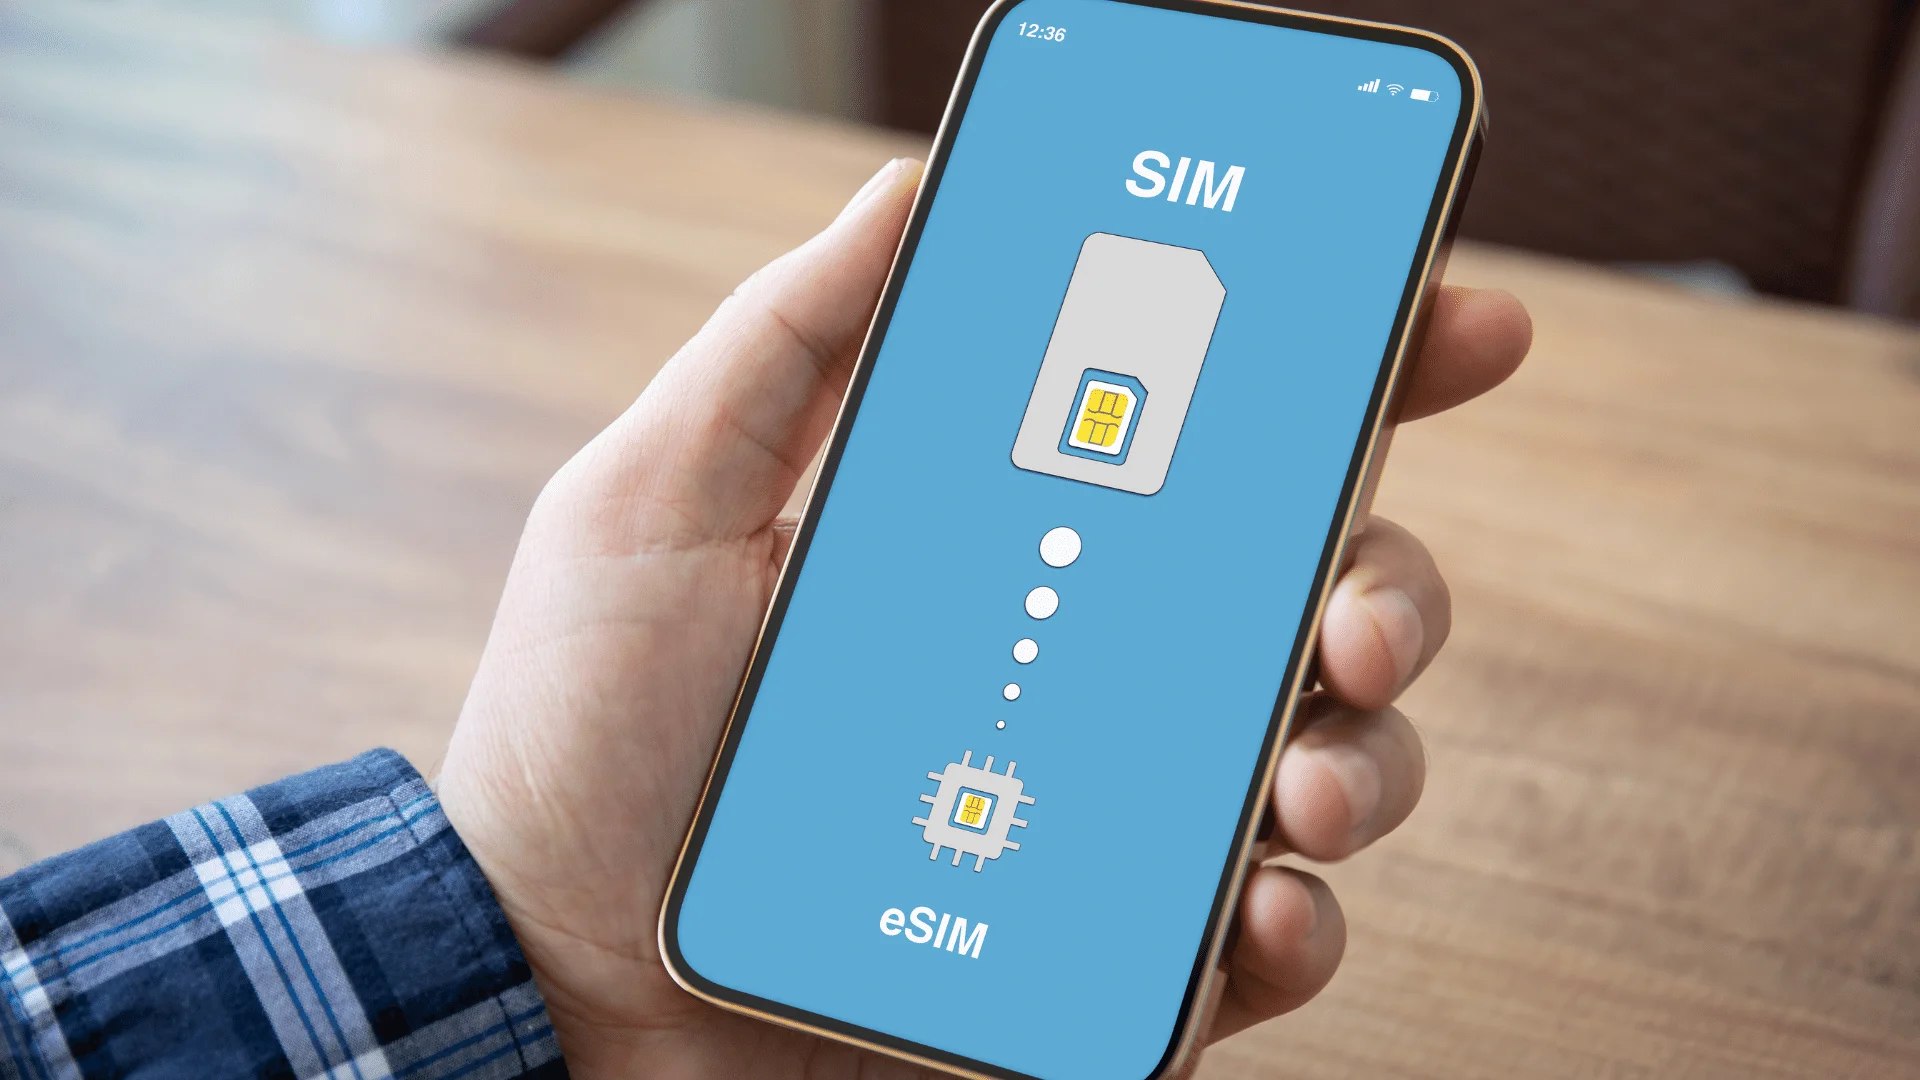 What Are The Main Advantages of eSIM?